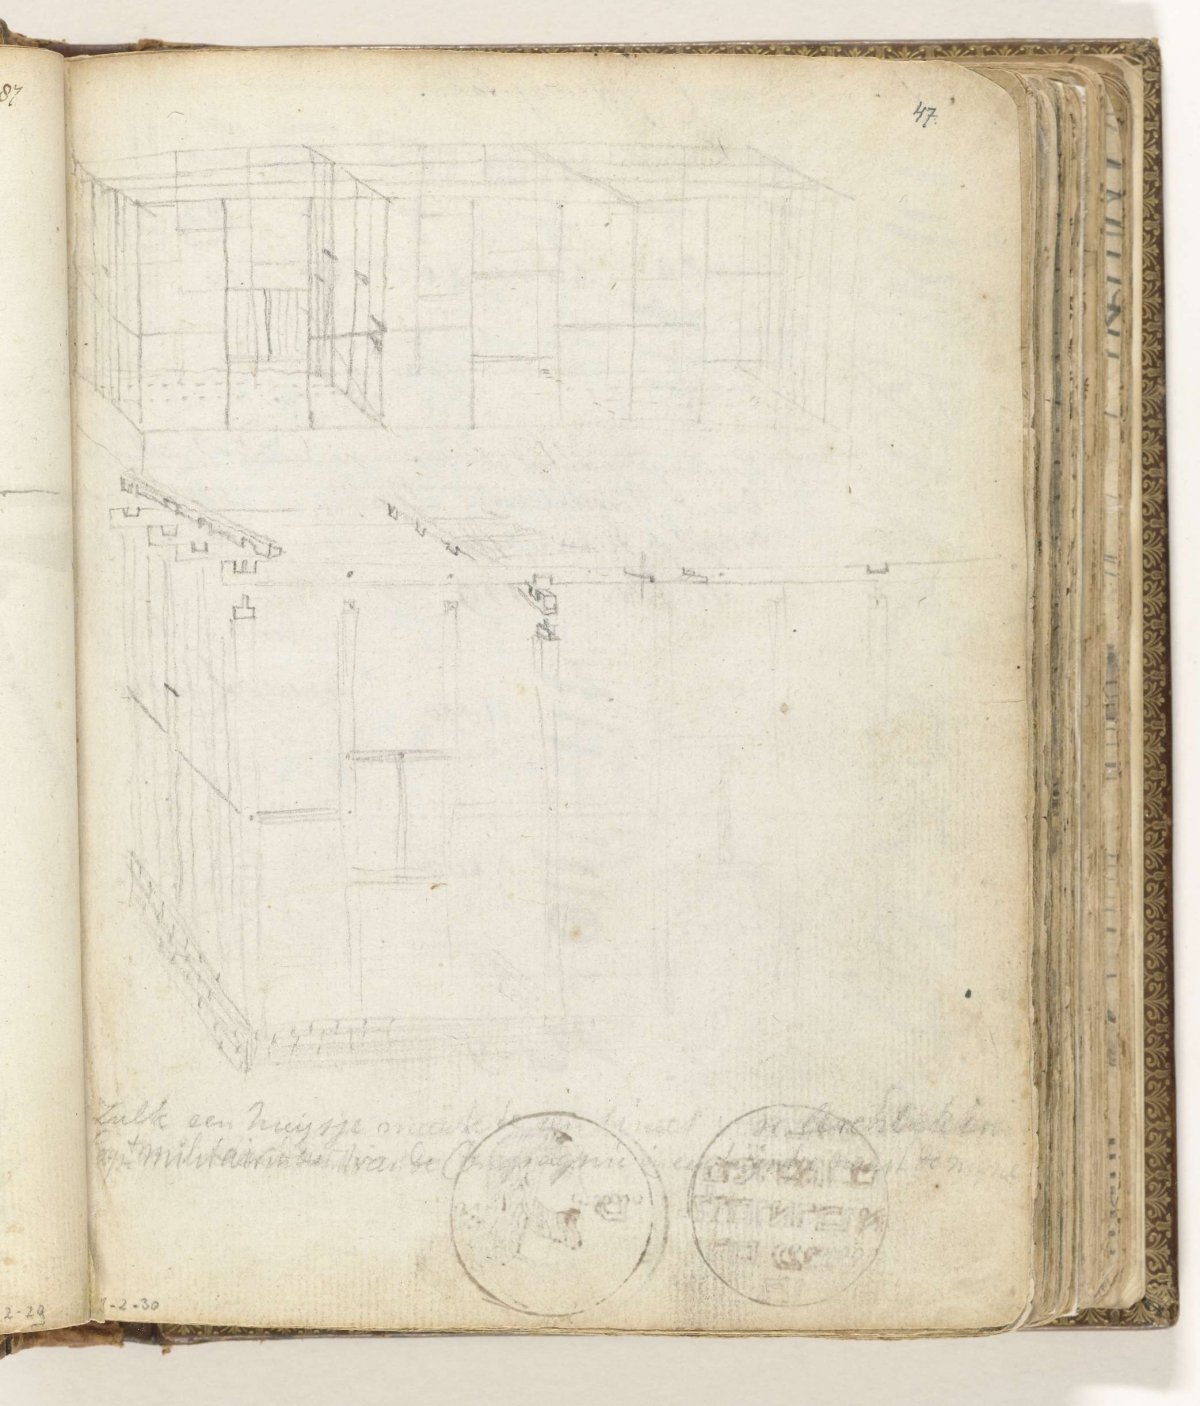 Construction drawing of a house, Jan Brandes, 1779 - 1785